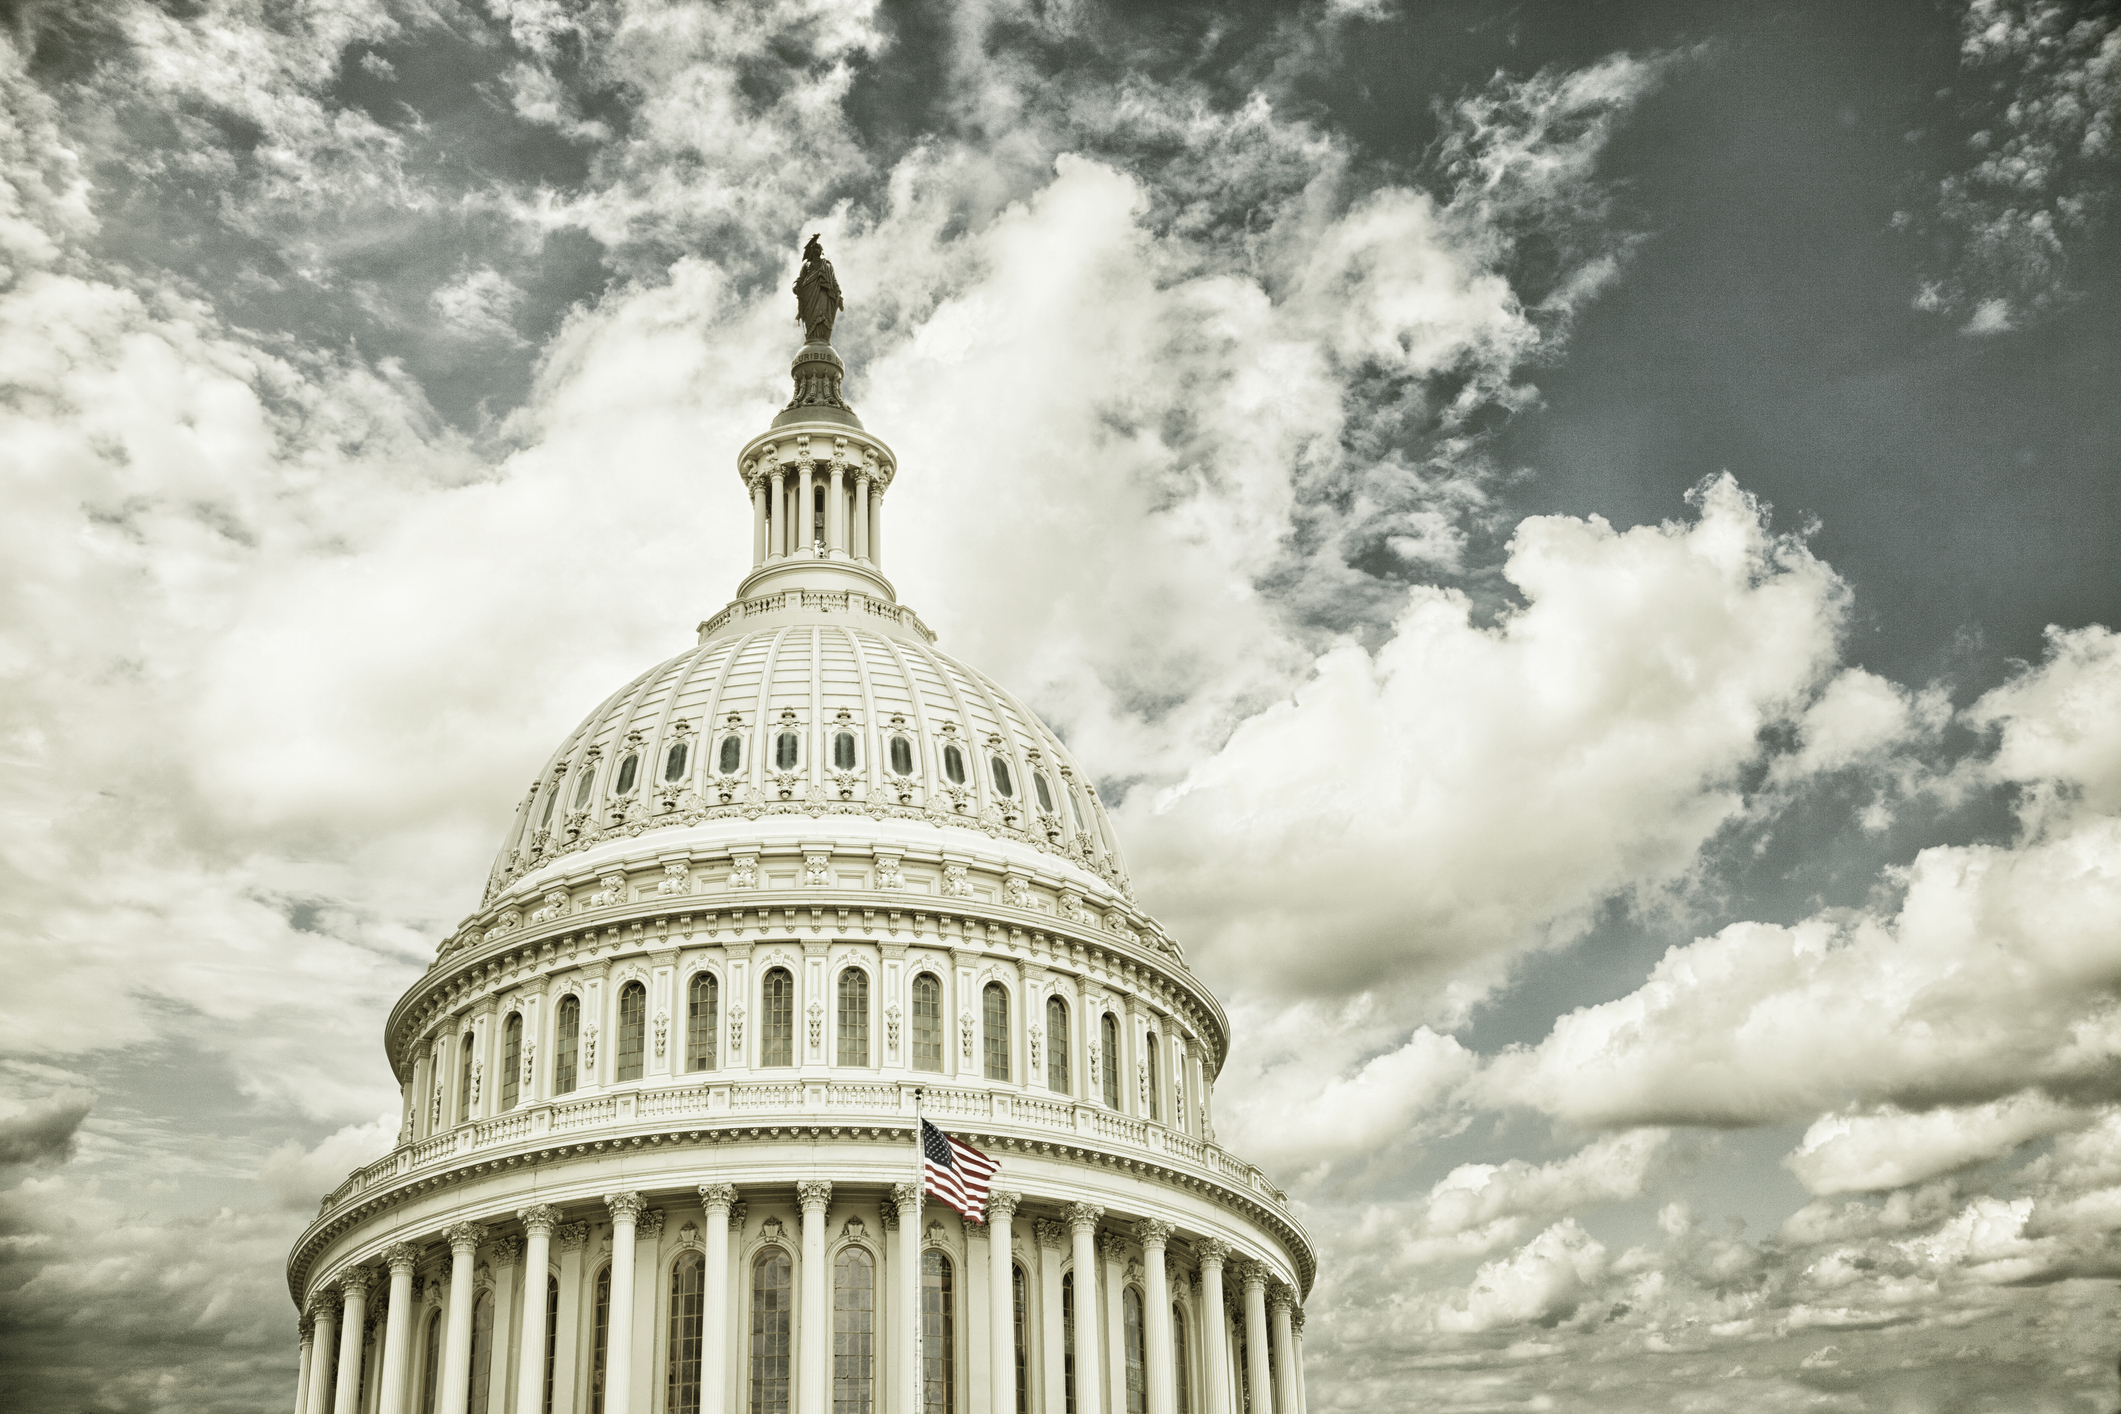 The Month Ahead in Health Care Reform